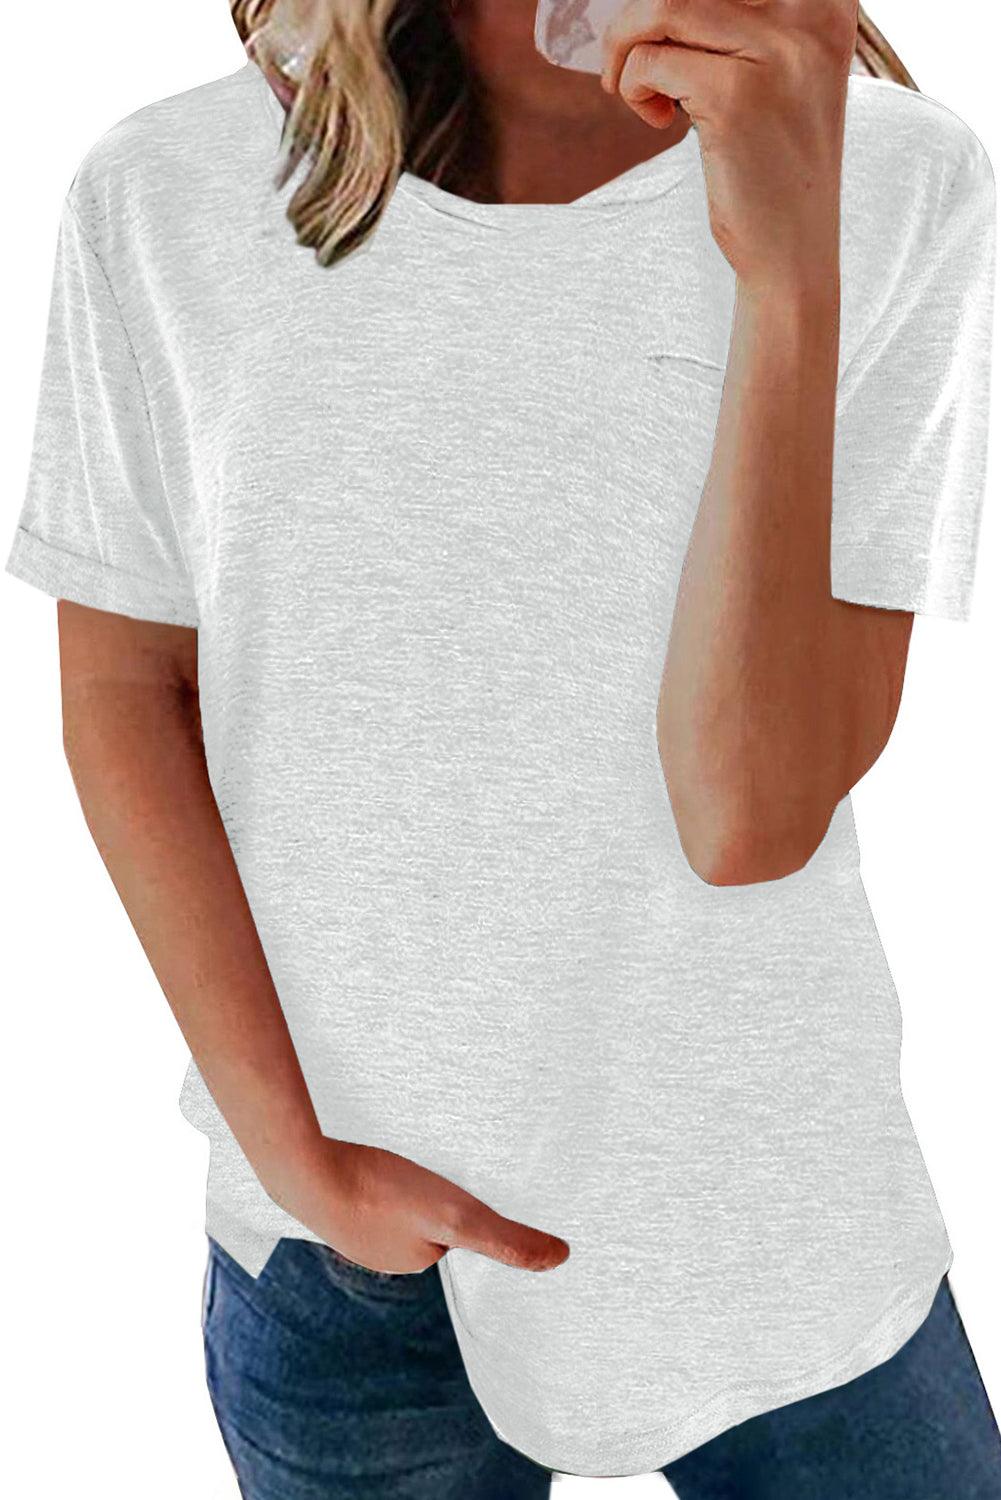 Solid Color Rolled Short Sleeve T Shirt - L & M Kee, LLC